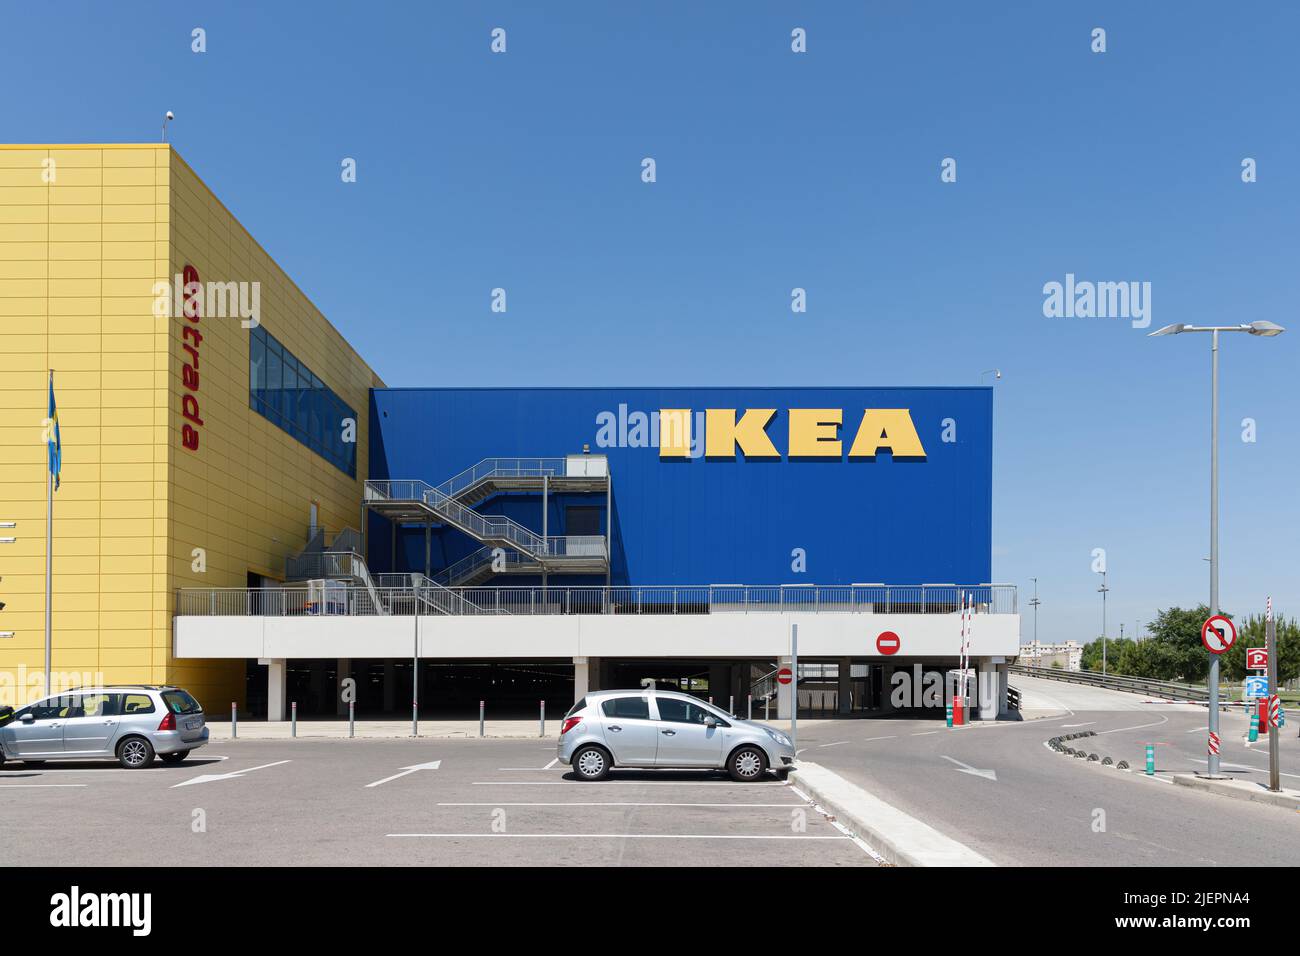 ALFAFAR, SPAIN - JUNE 06, 2022: Ikea is a Swedish multinational company that designs and sells furniture, kitchen appliances and home accessories Stock Photo